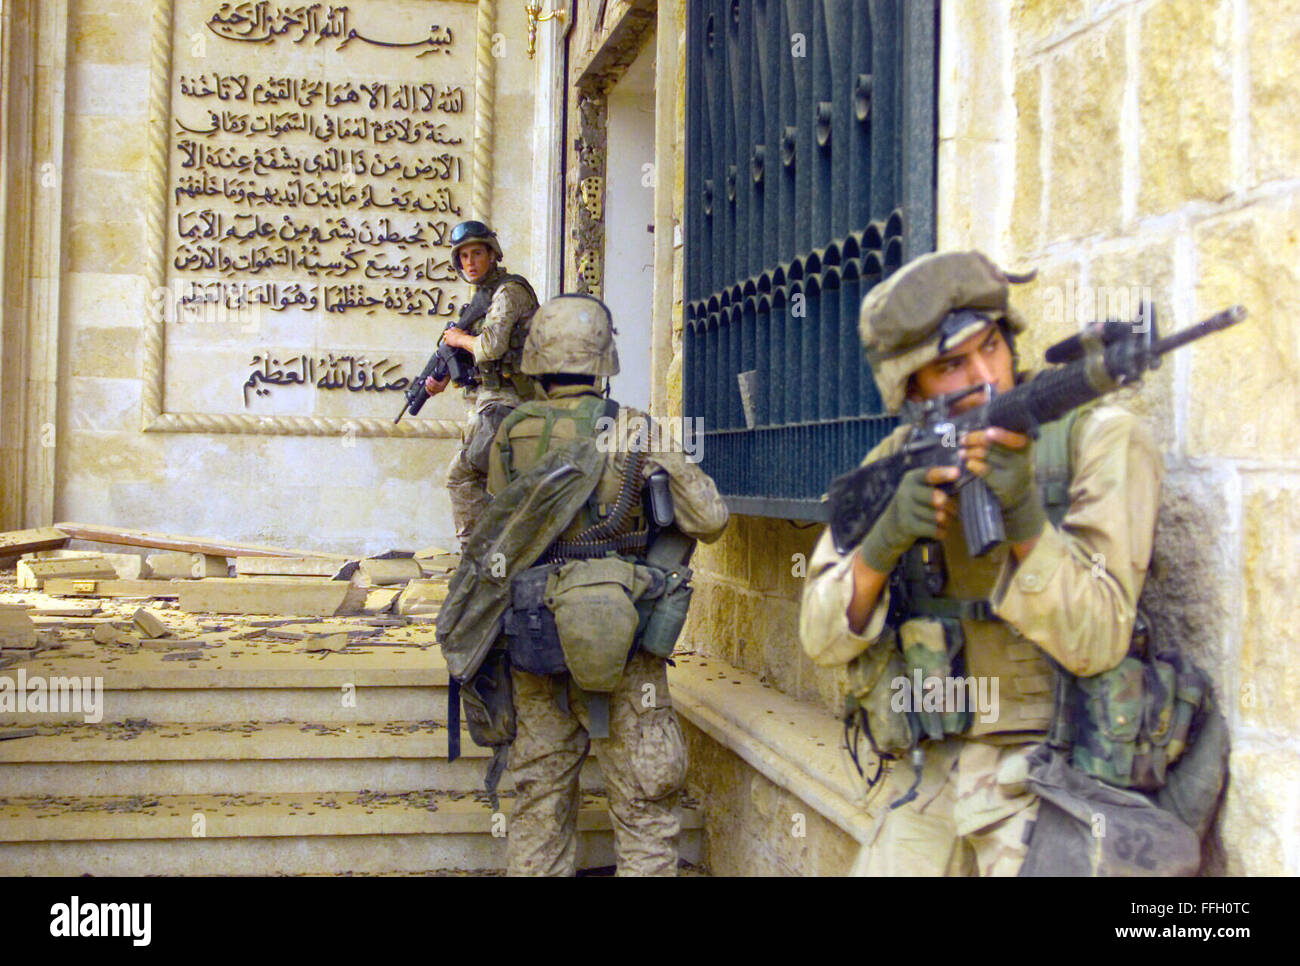 US Marines Corps (USMC) Marines from the 1st Battalion, 7th Marines (1/7), Charlie Company, Twentynine Palms, California (CA), cover each other with 5.56 mm M16A2 assault rifles as they prepare to enter one of Saddam Hussein’s palaces in Baghdad as they takeover the complex during Operation IRAQI Stock Photo